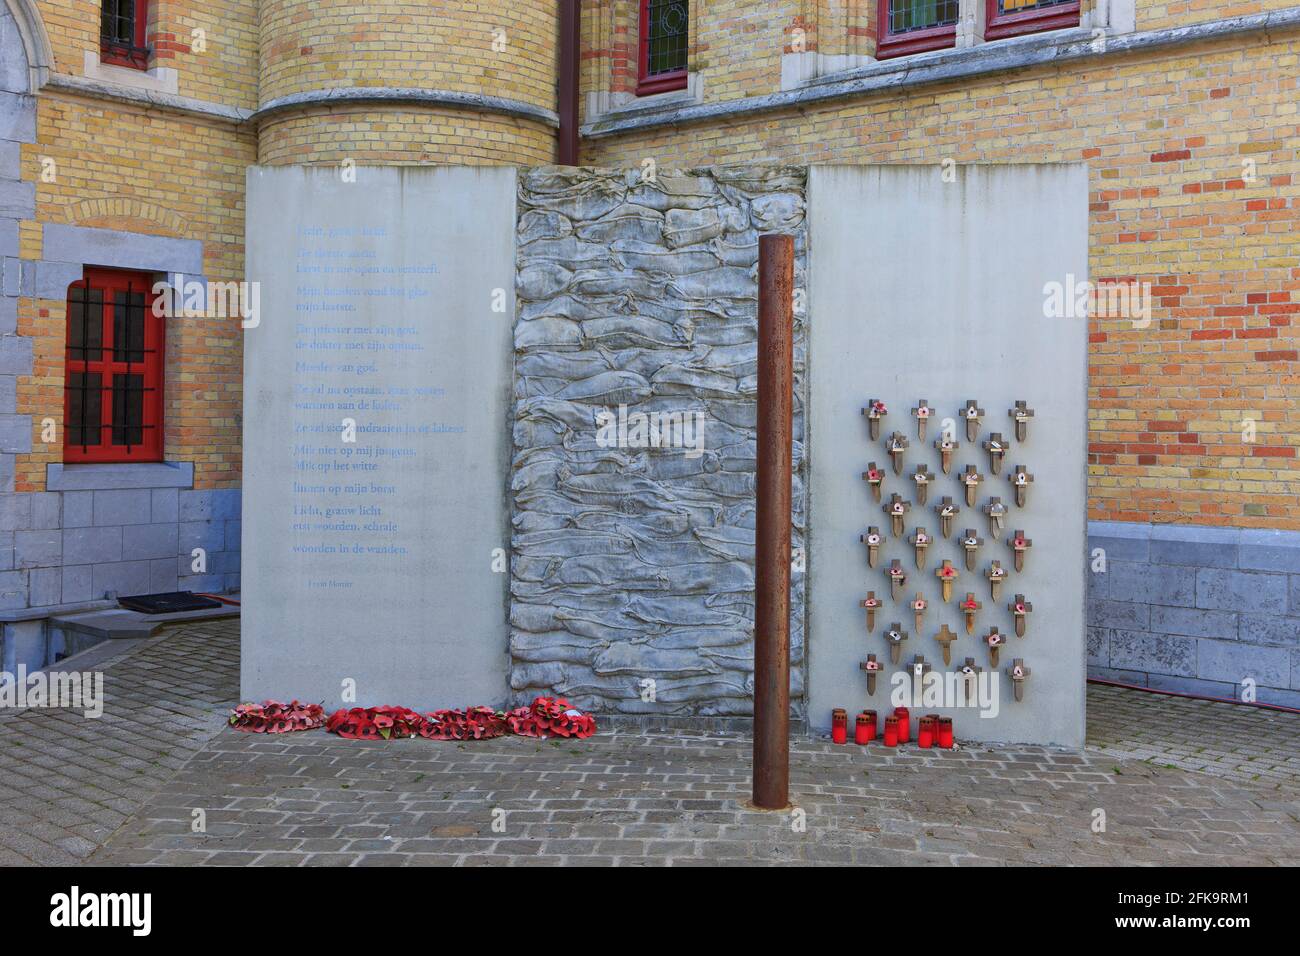 The execution spot at the inner couryard of the town hall of Poperinge, Belgium where soldiers were executed during World War I Stock Photo